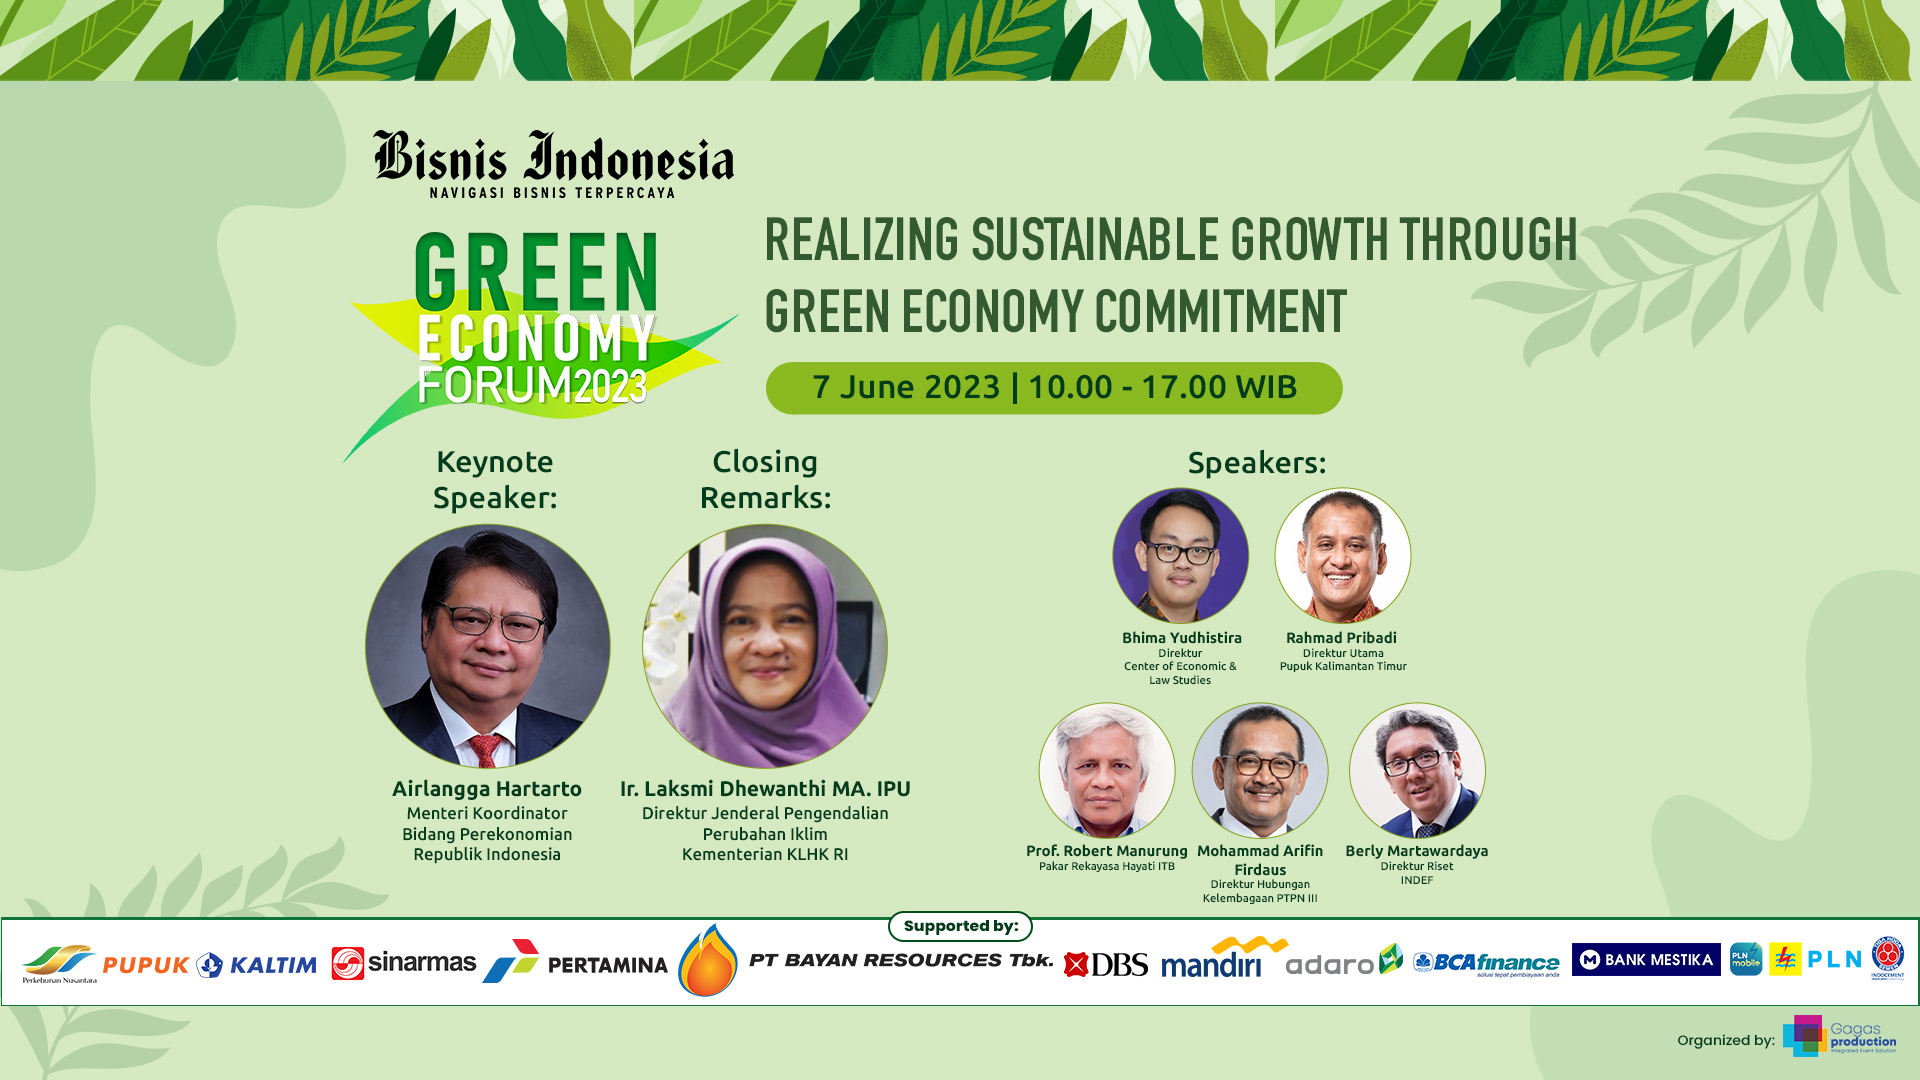 Bisnis Indonesia Green Economy Forum 2023 Day 2 - Realizing Sustainable Growth through Green Economy Commitment